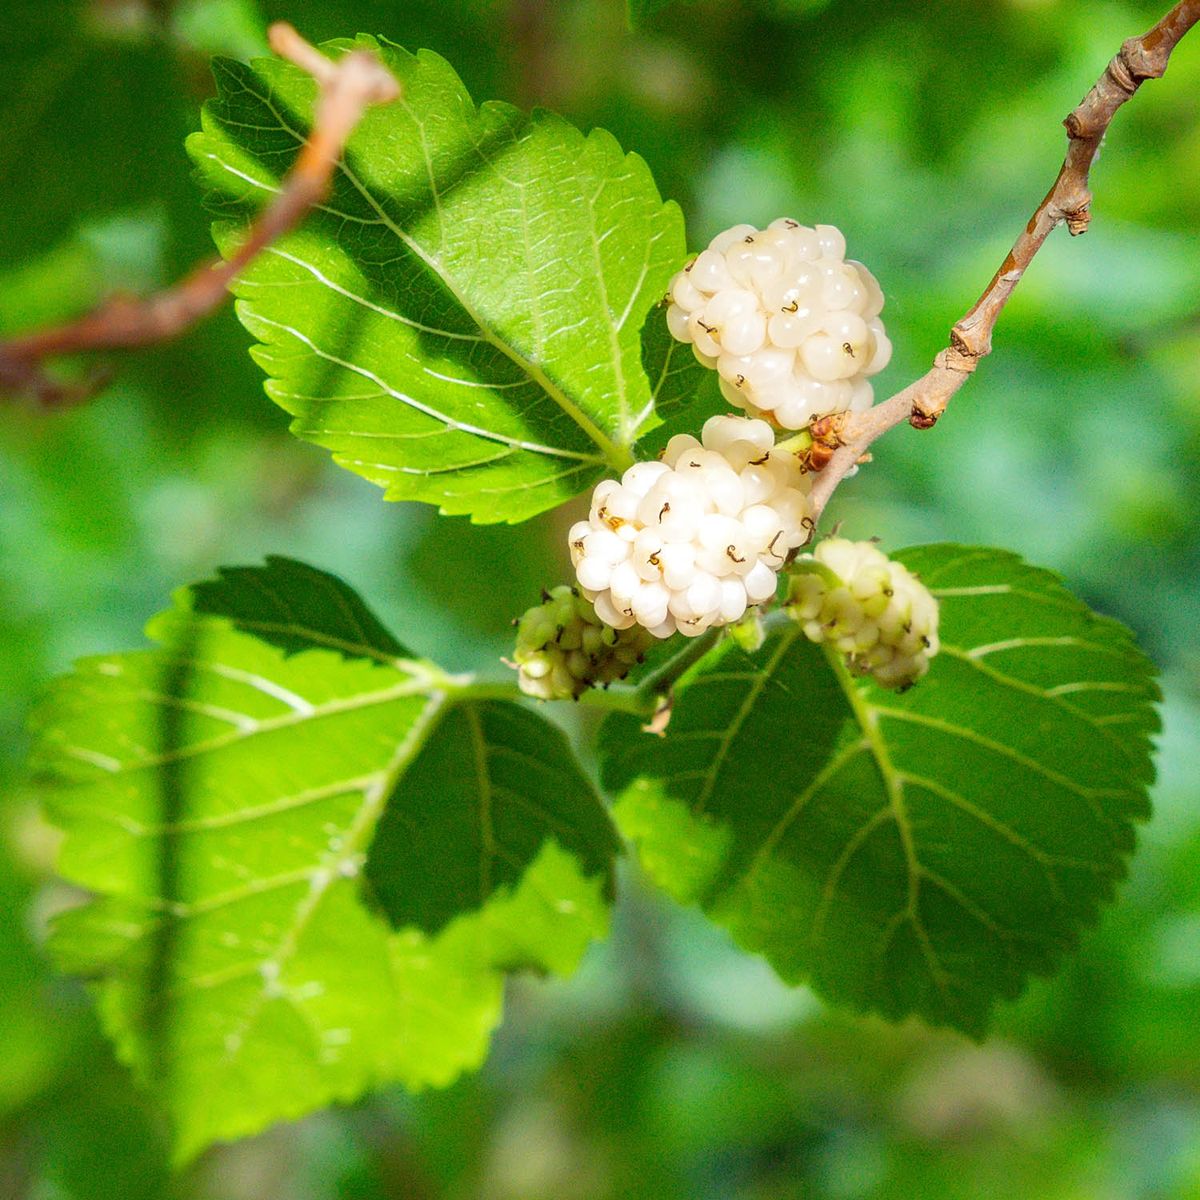 white mulberry berry and leaf